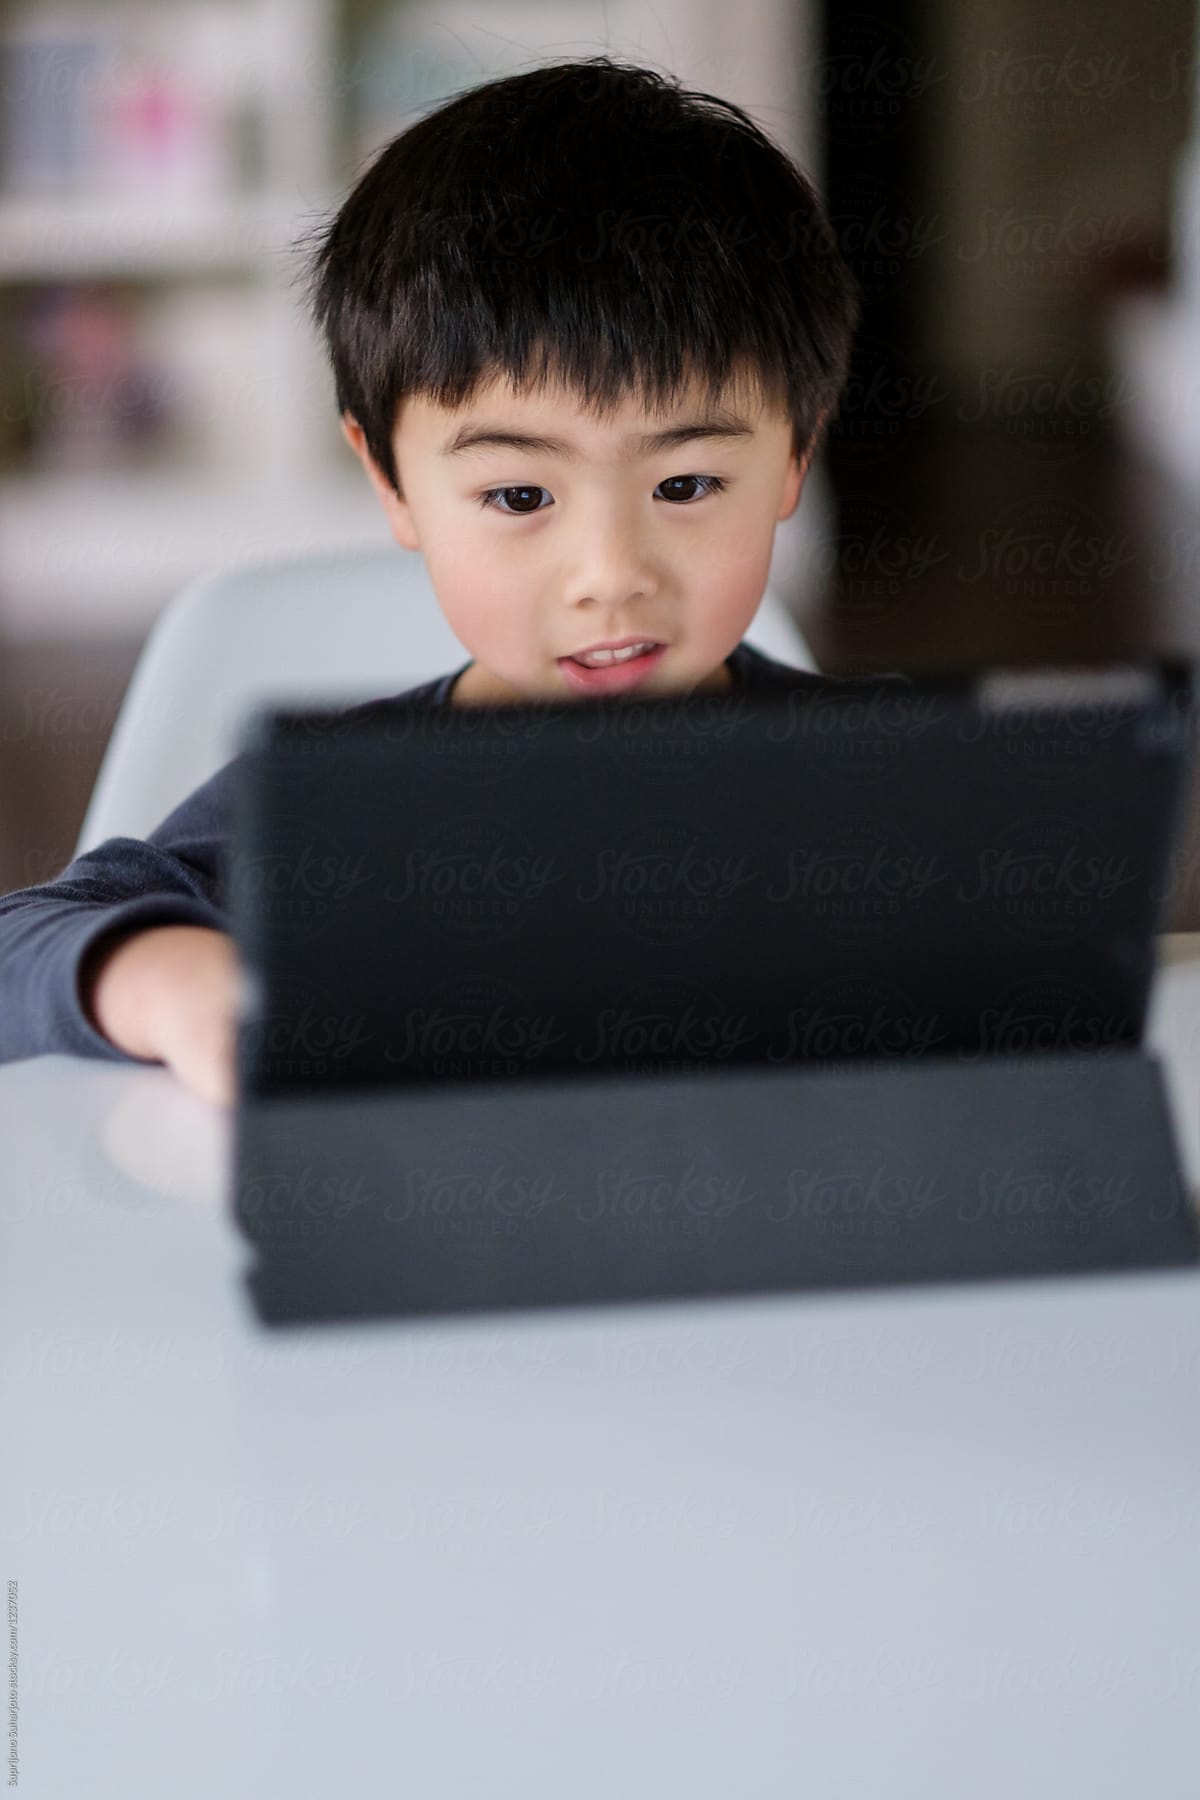 Asian boy playing game on a tablet PC